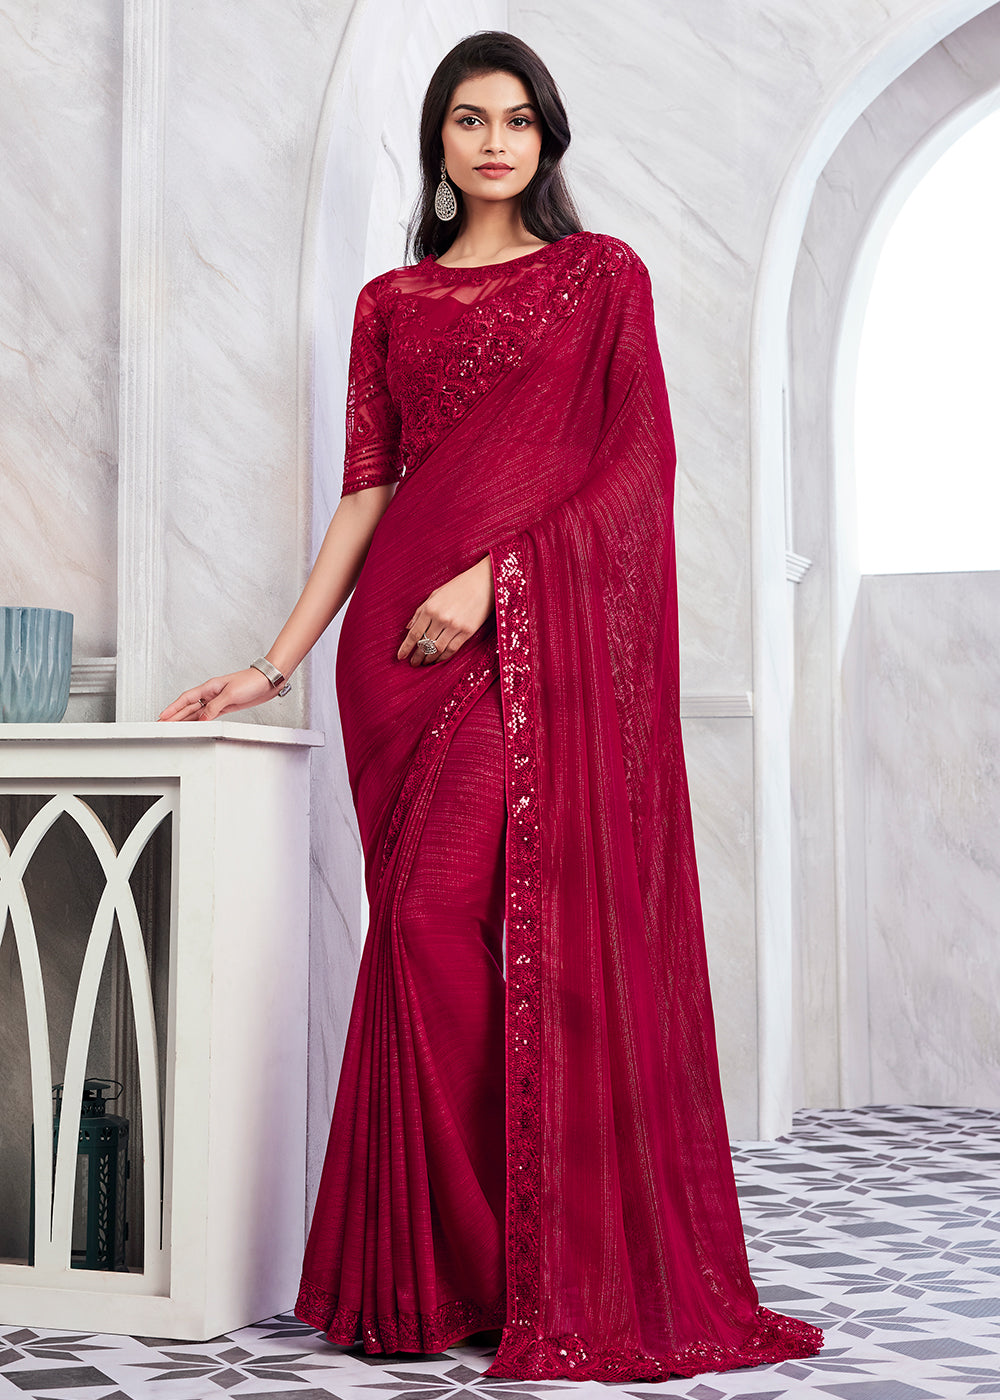 Buy Now Lovely Cherry Red Silk Embroidered Designer Saree Online in USA, UK, Canada & Worldwide at Empress Clothing.